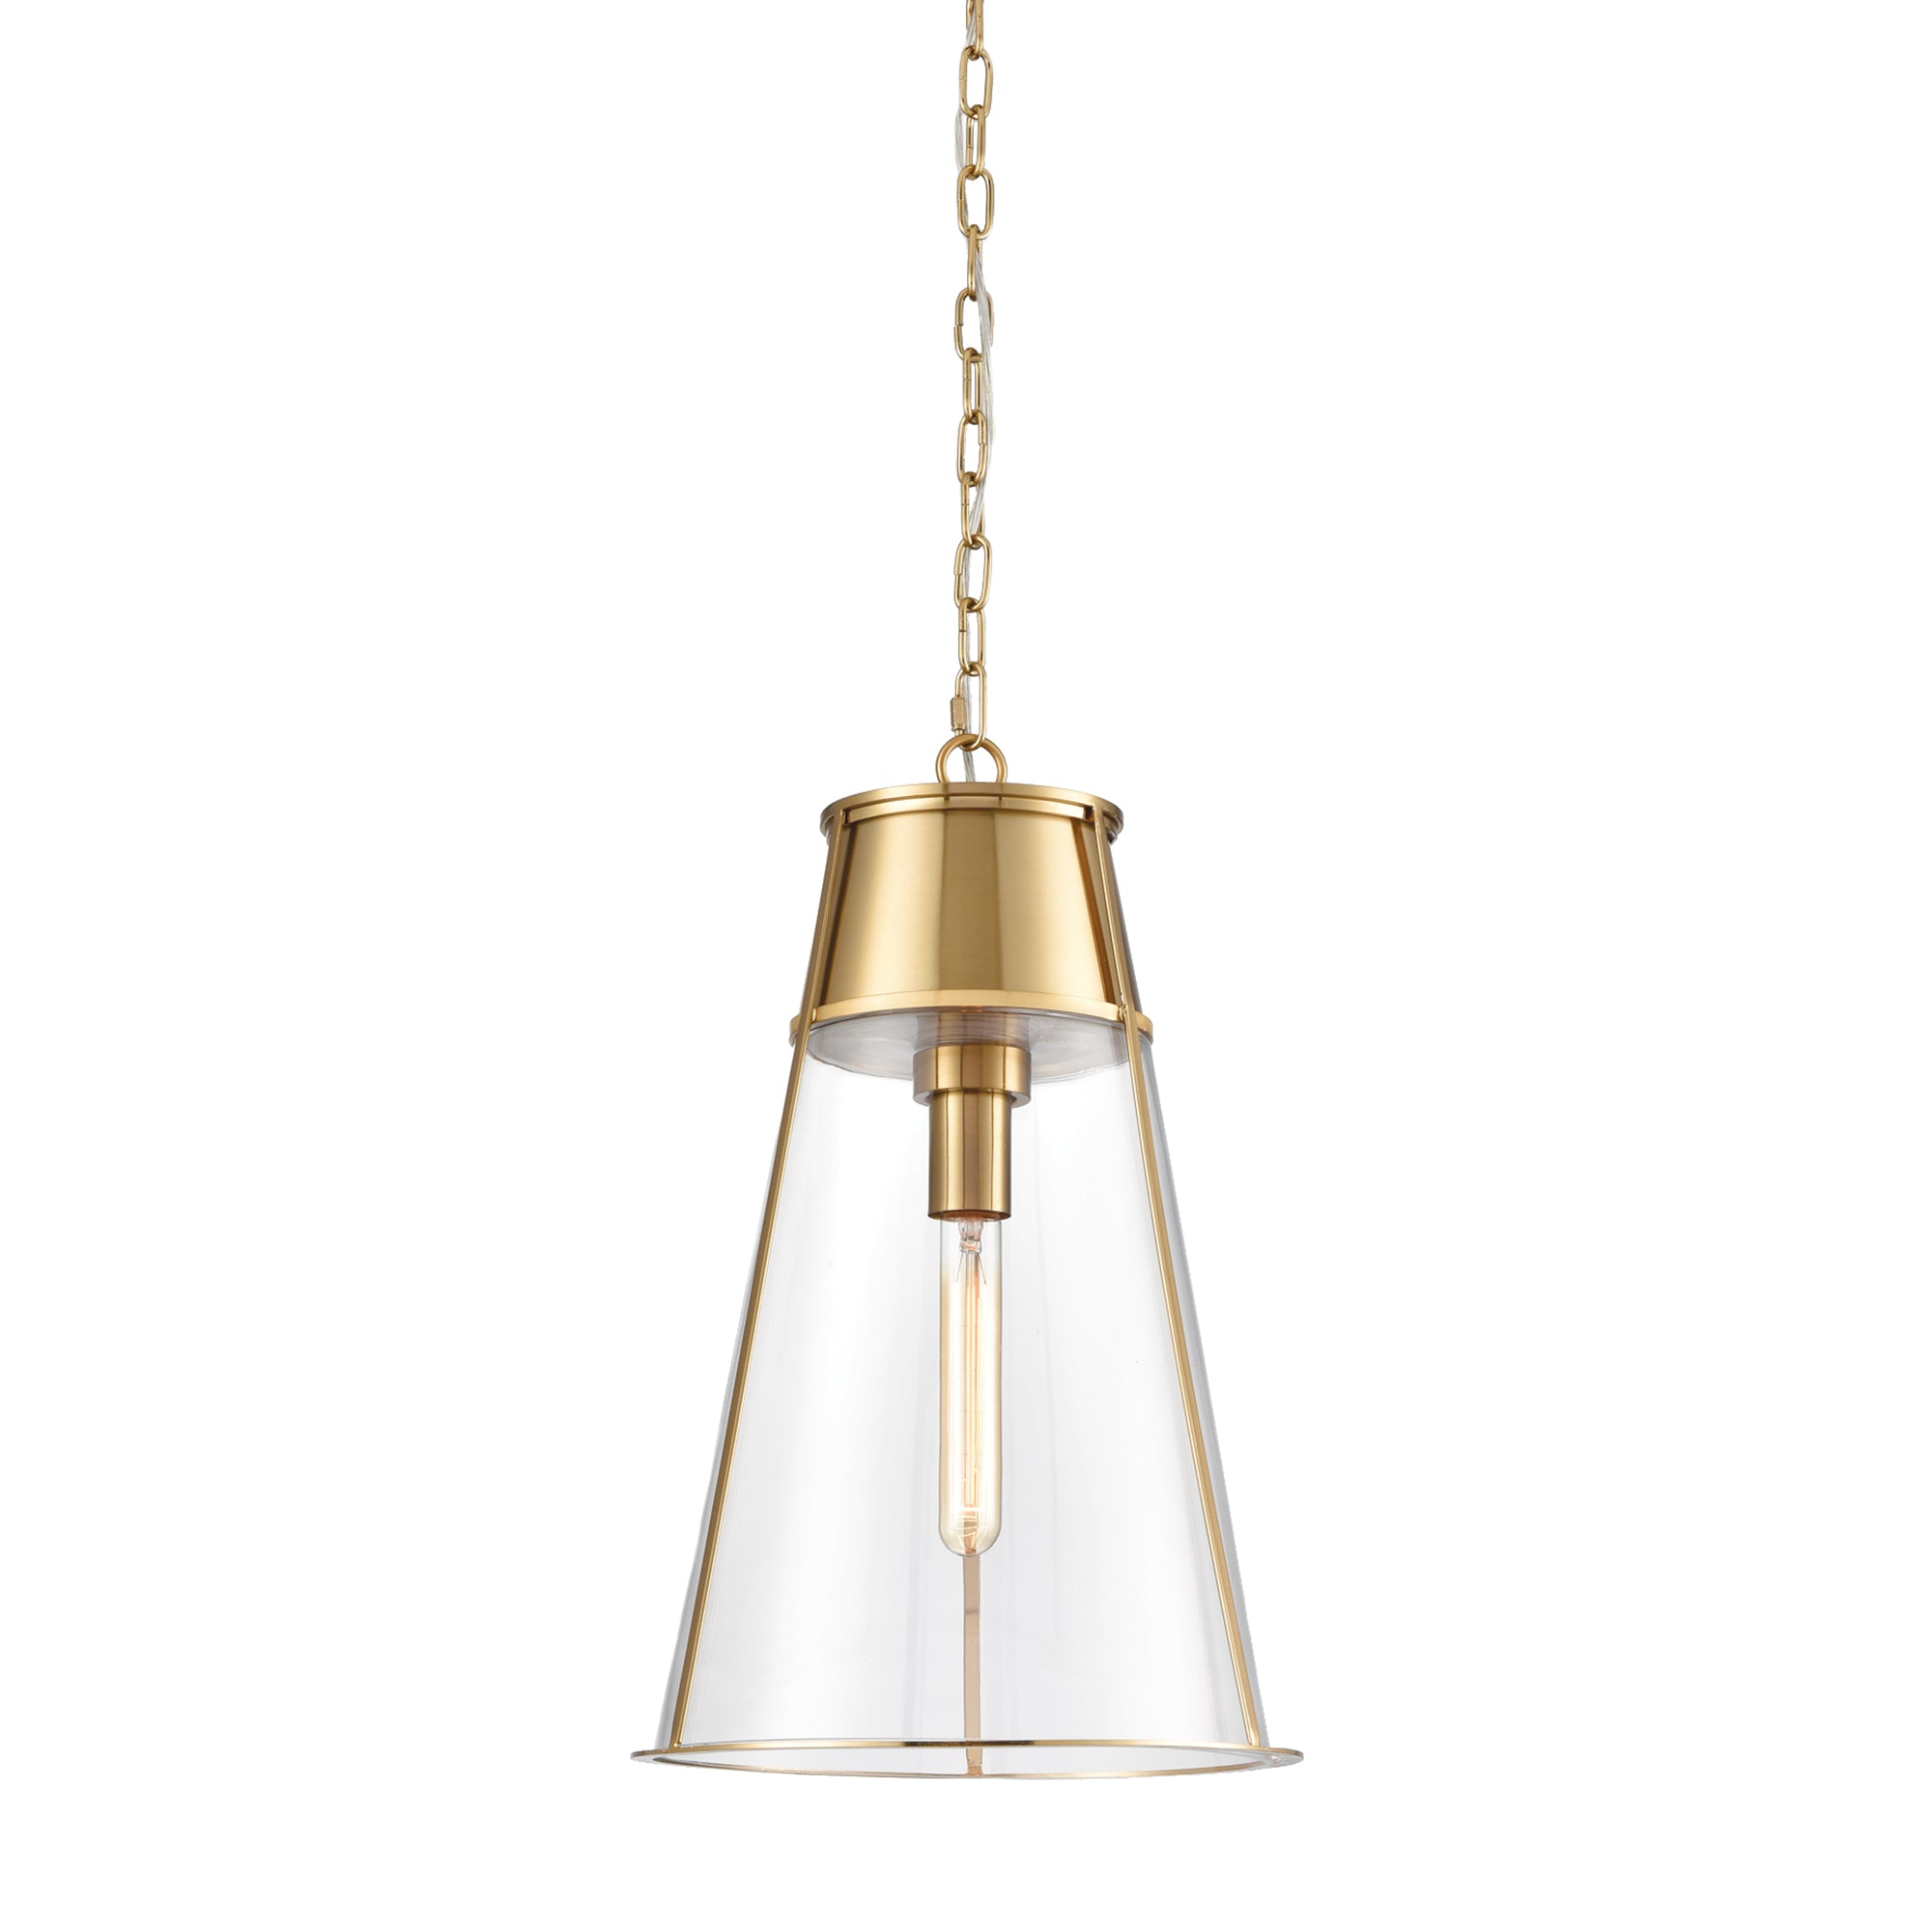 Generous in scale, and made of a modern mix of brass and glass, this pendant is a handsome fixture. Over an island, in an entry or foyer, a solid choice. Amethyst Home provides interior design, new construction, custom furniture, and area rugs in the Calabasas metro area.